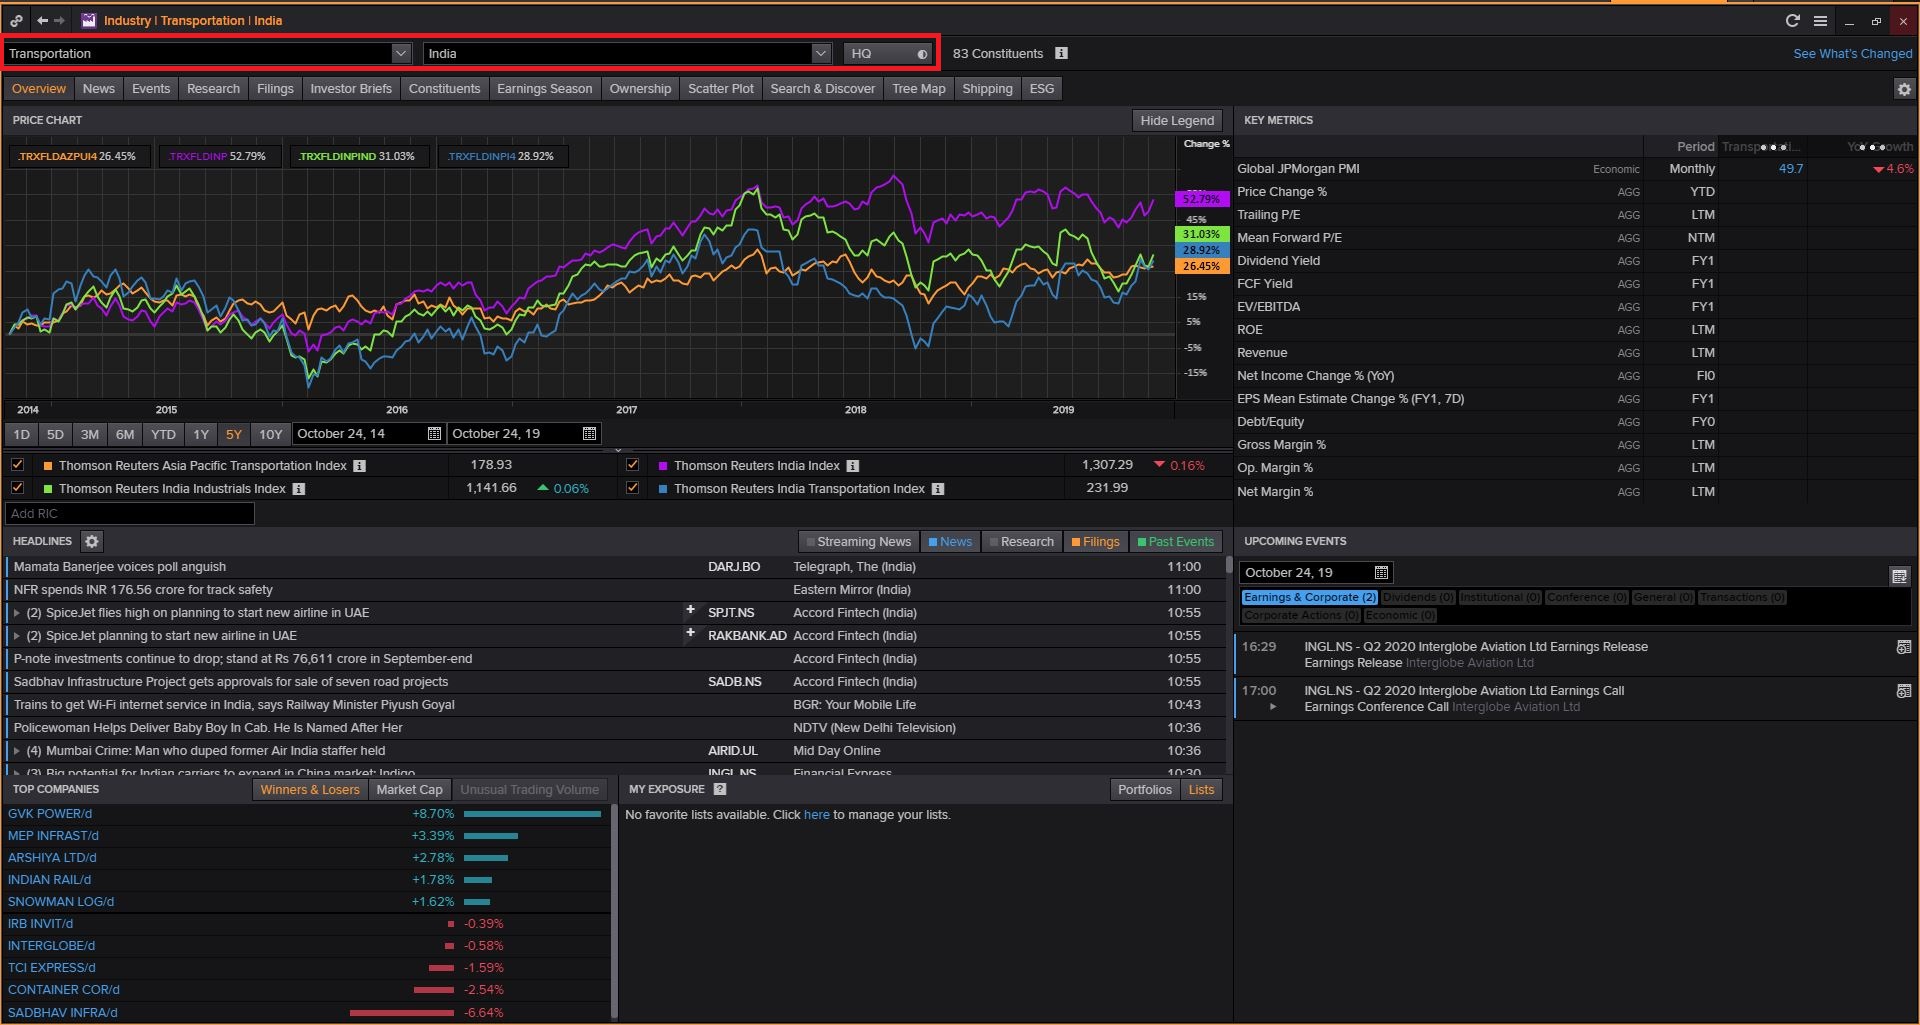 Login to Thomson Reuters Eikon (Available Only in Library) then Type INDUS and Search and Select Industrials and Click on Transportation and Select Country